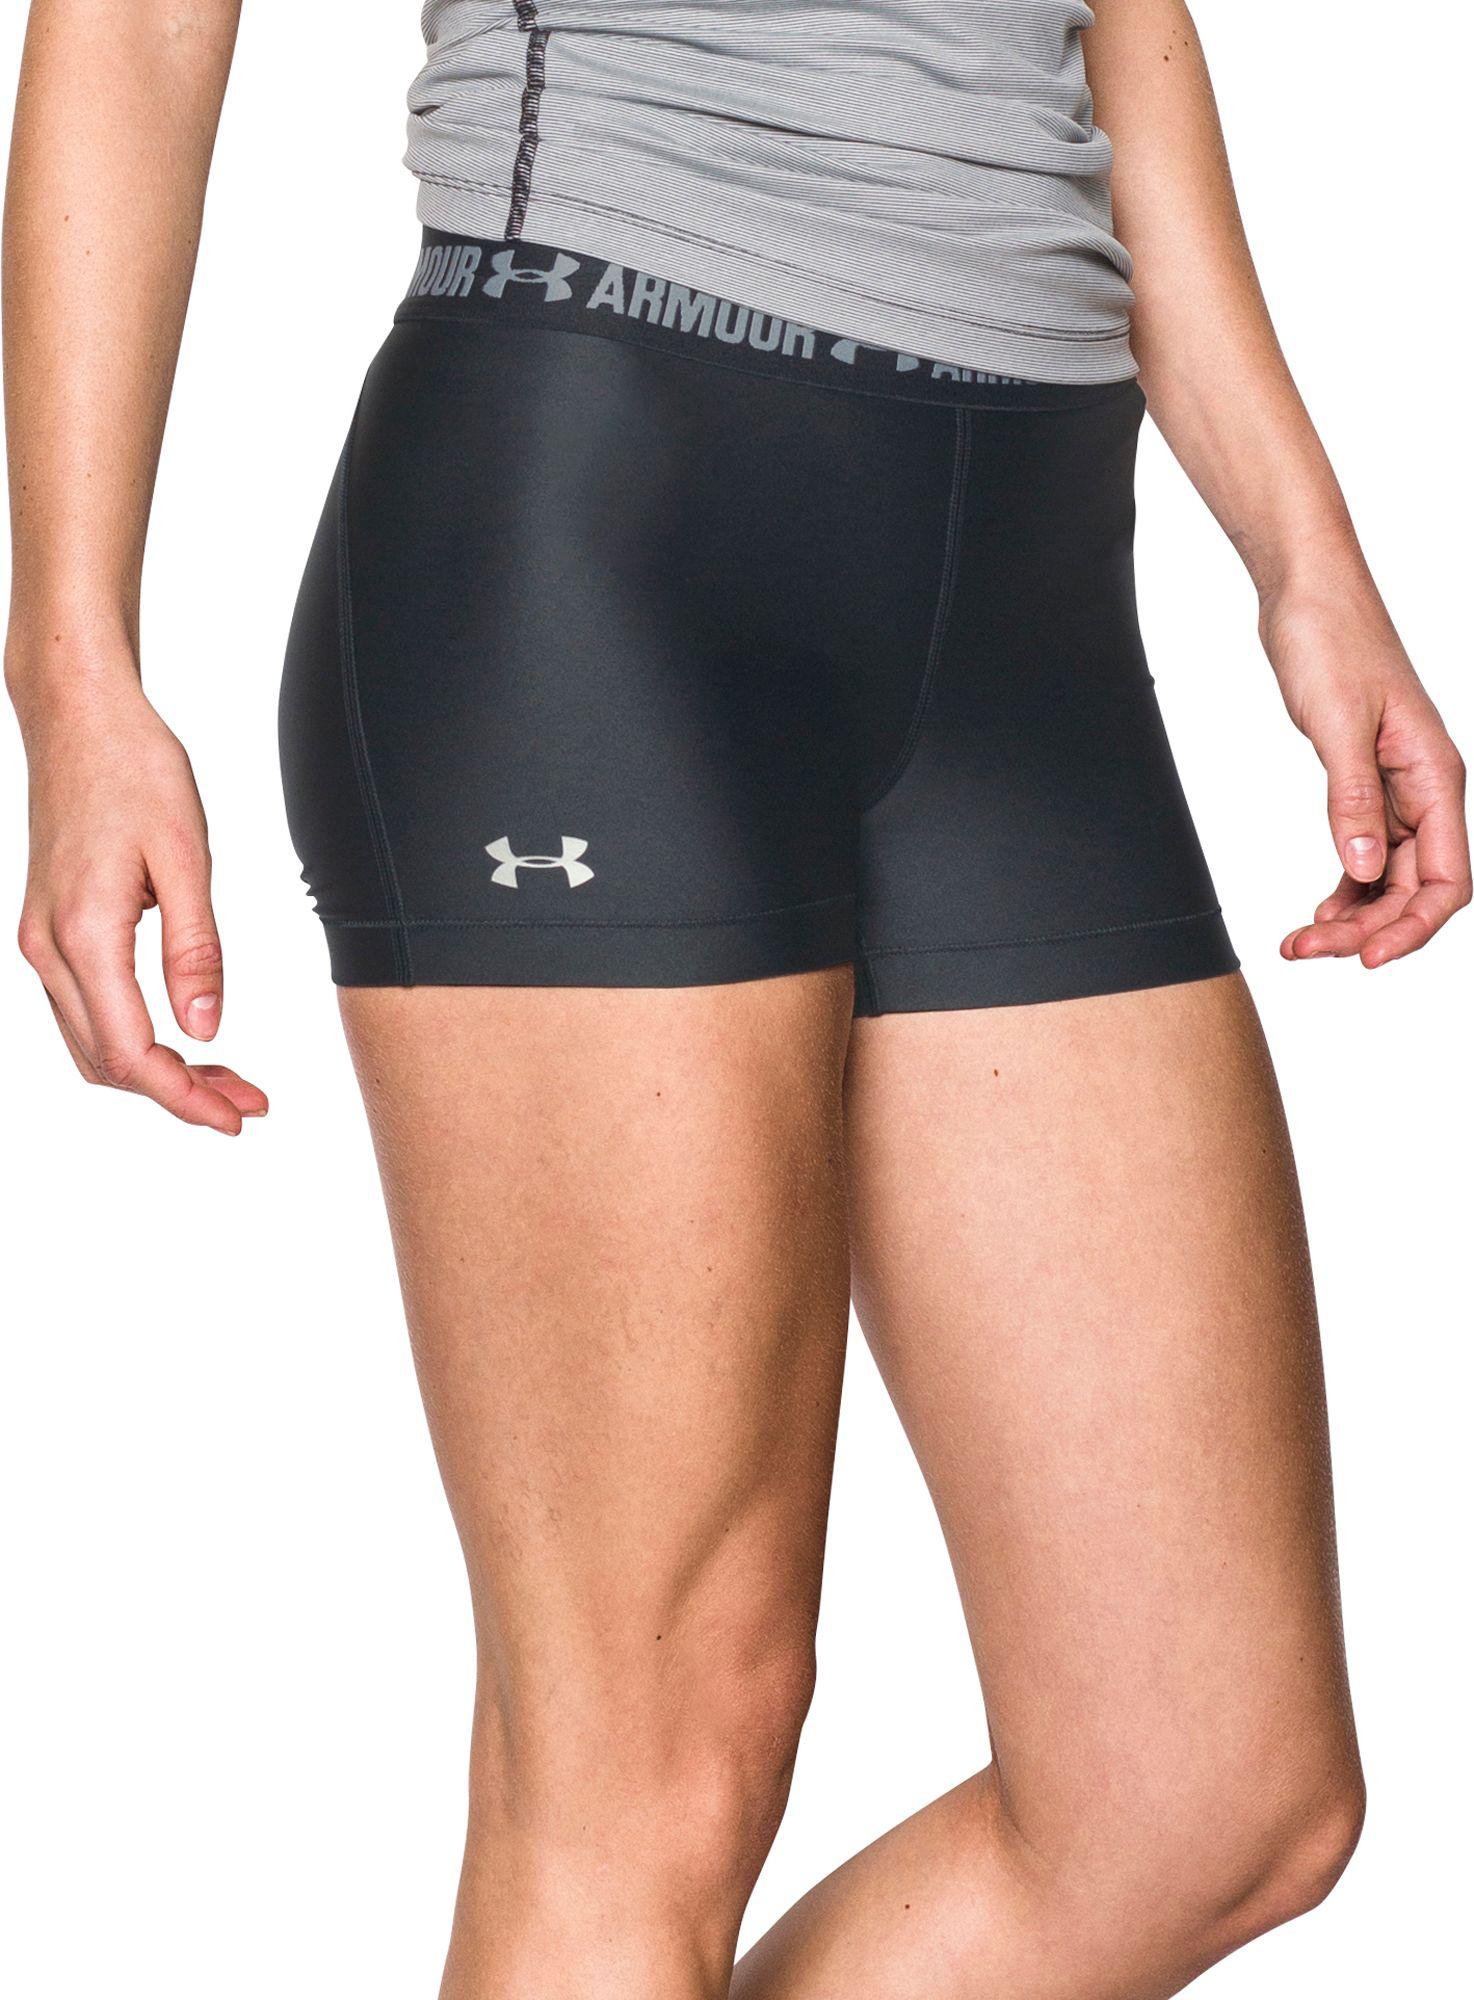 under armour women's compression shorts